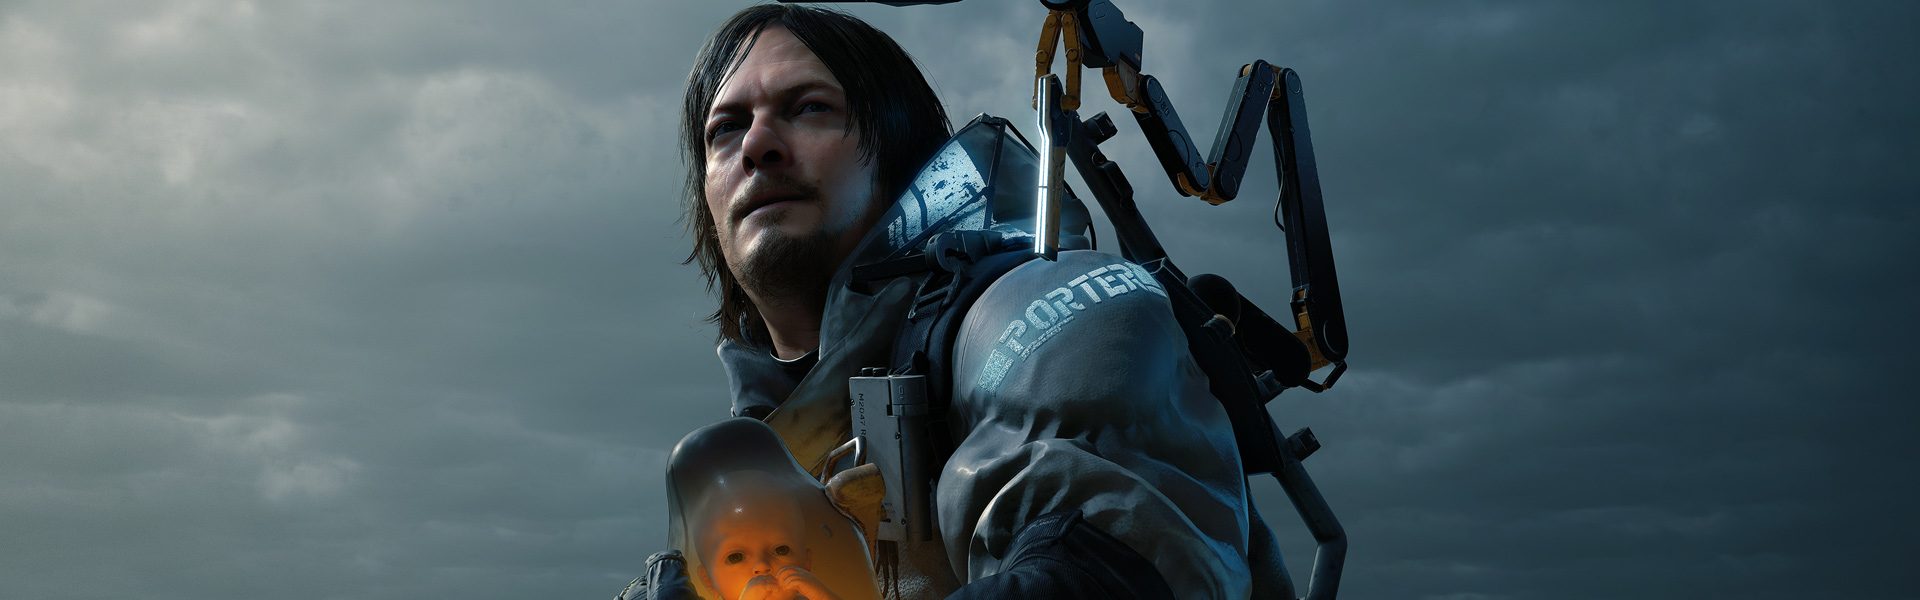 best buy death stranding special edition